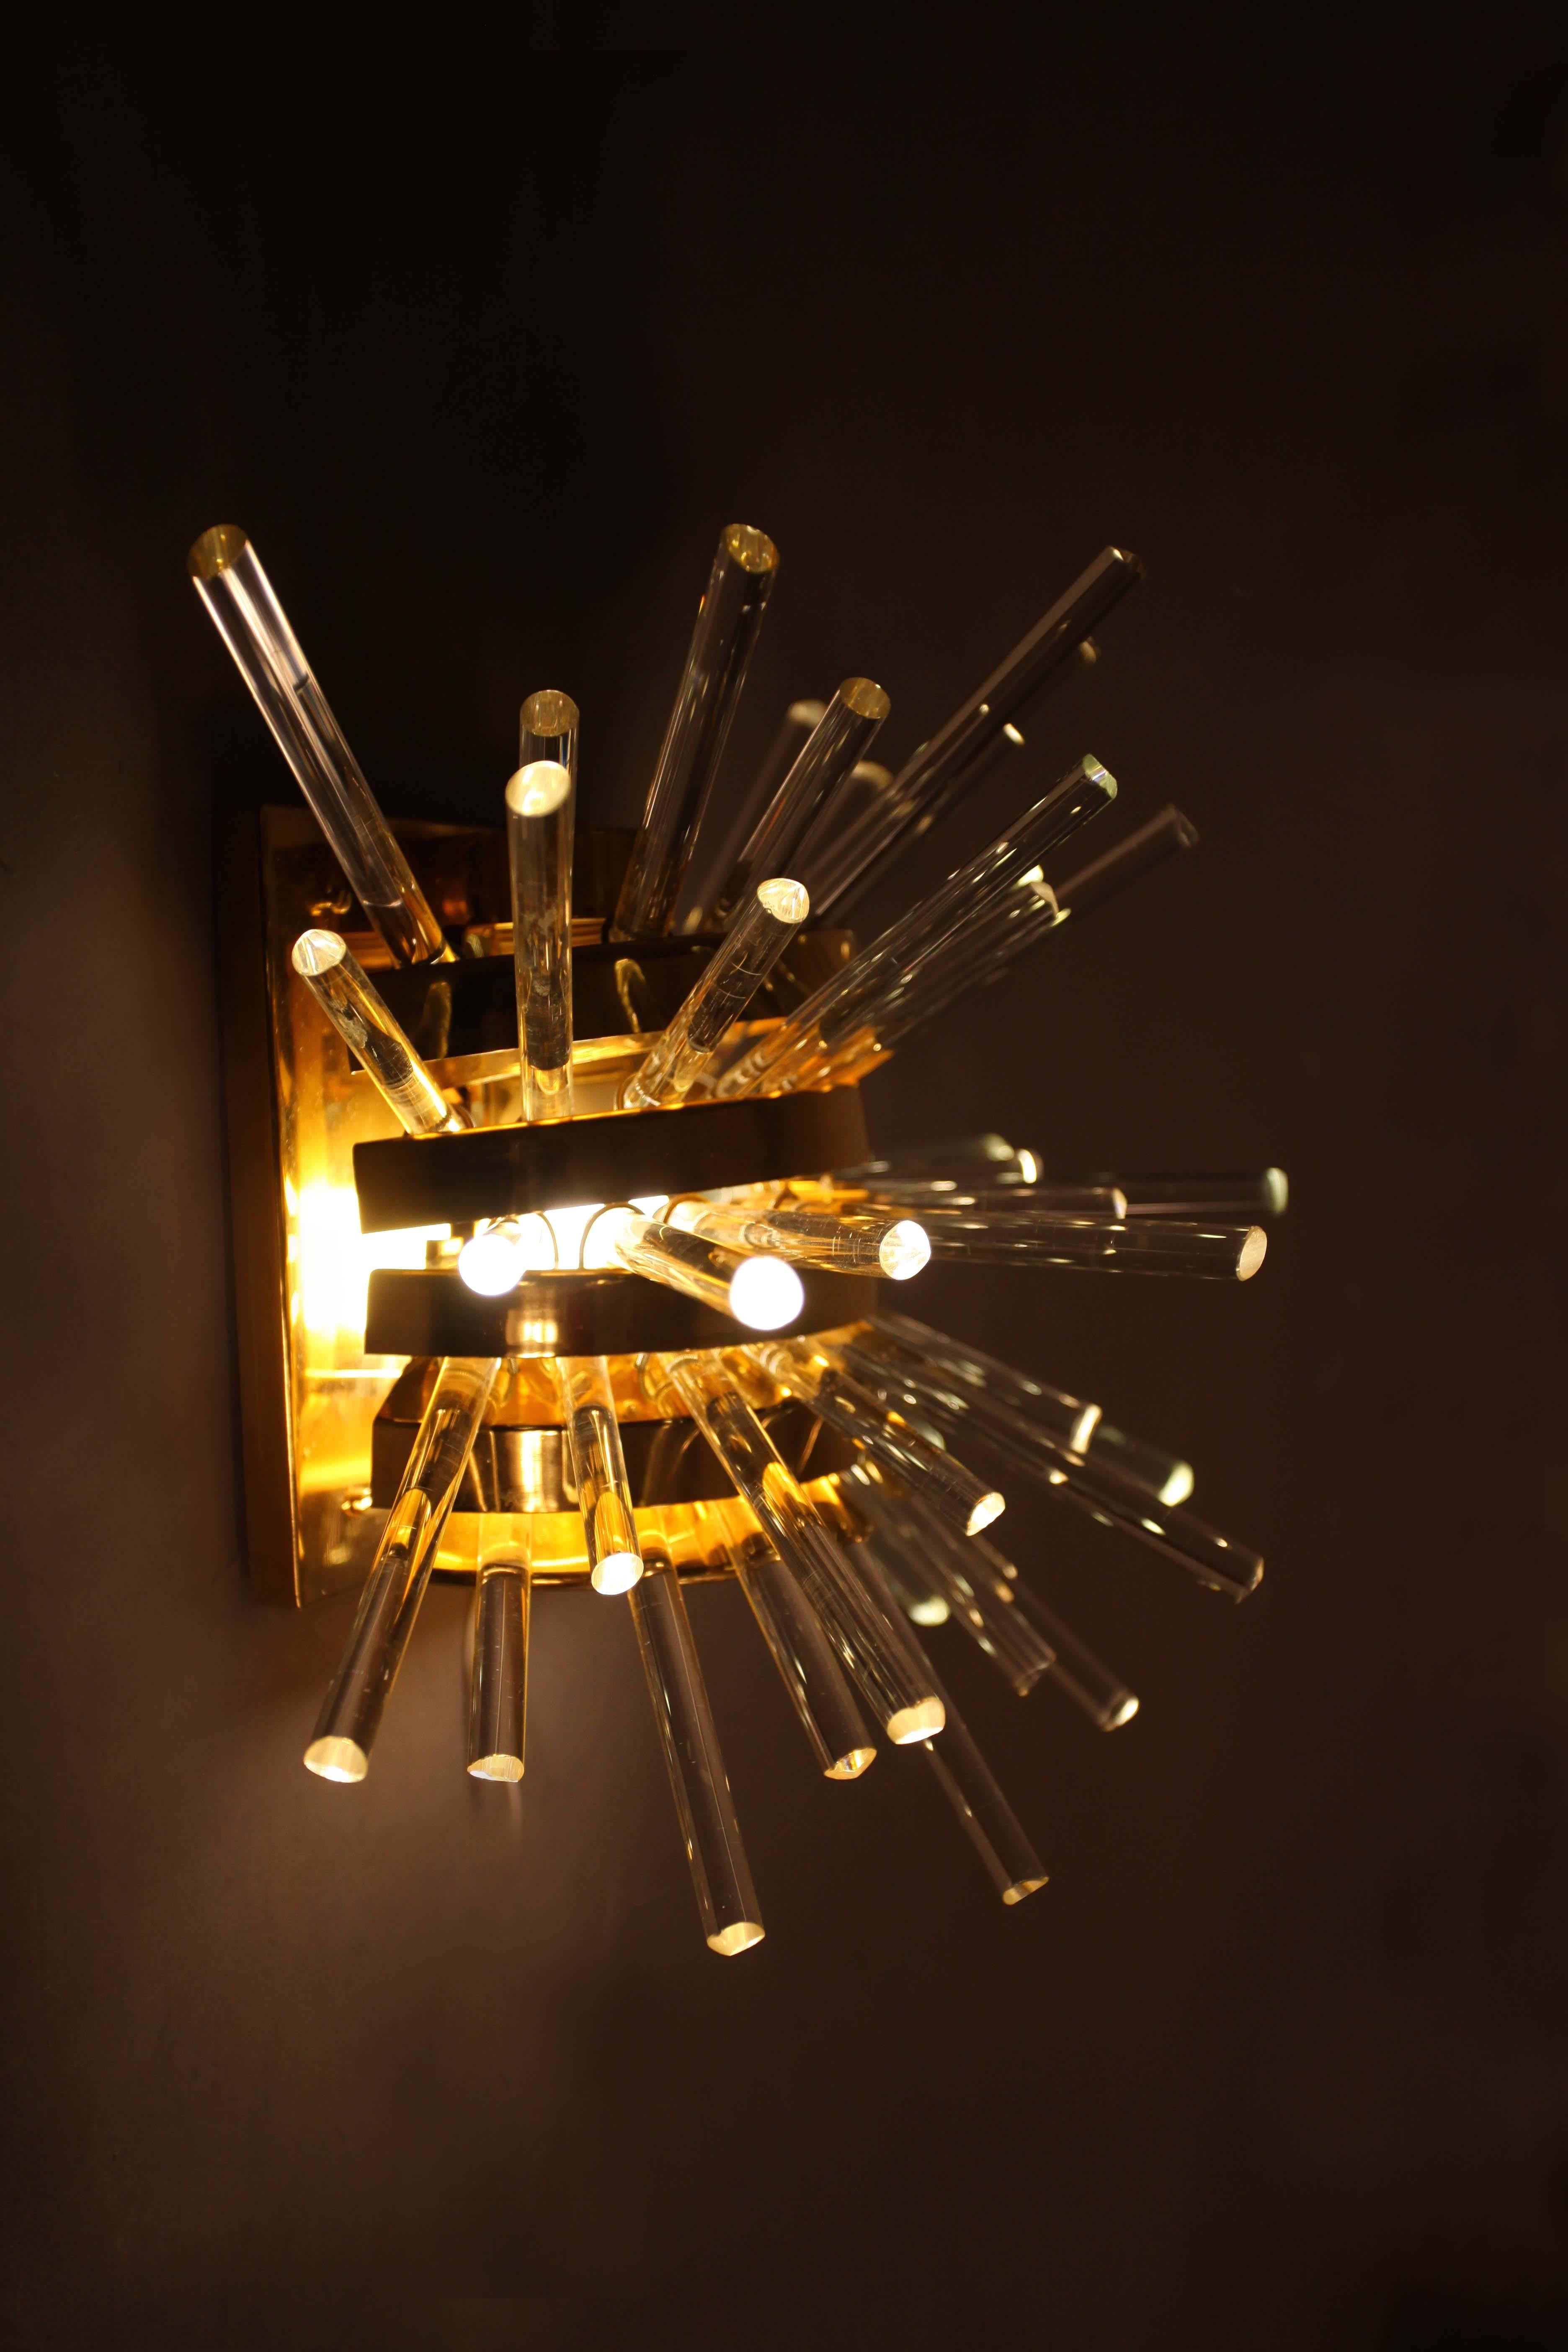 Wall scounce,
designed by Friedl Bakalowits
manufacter Bakalowits
Vienna 1960,
gold plated.